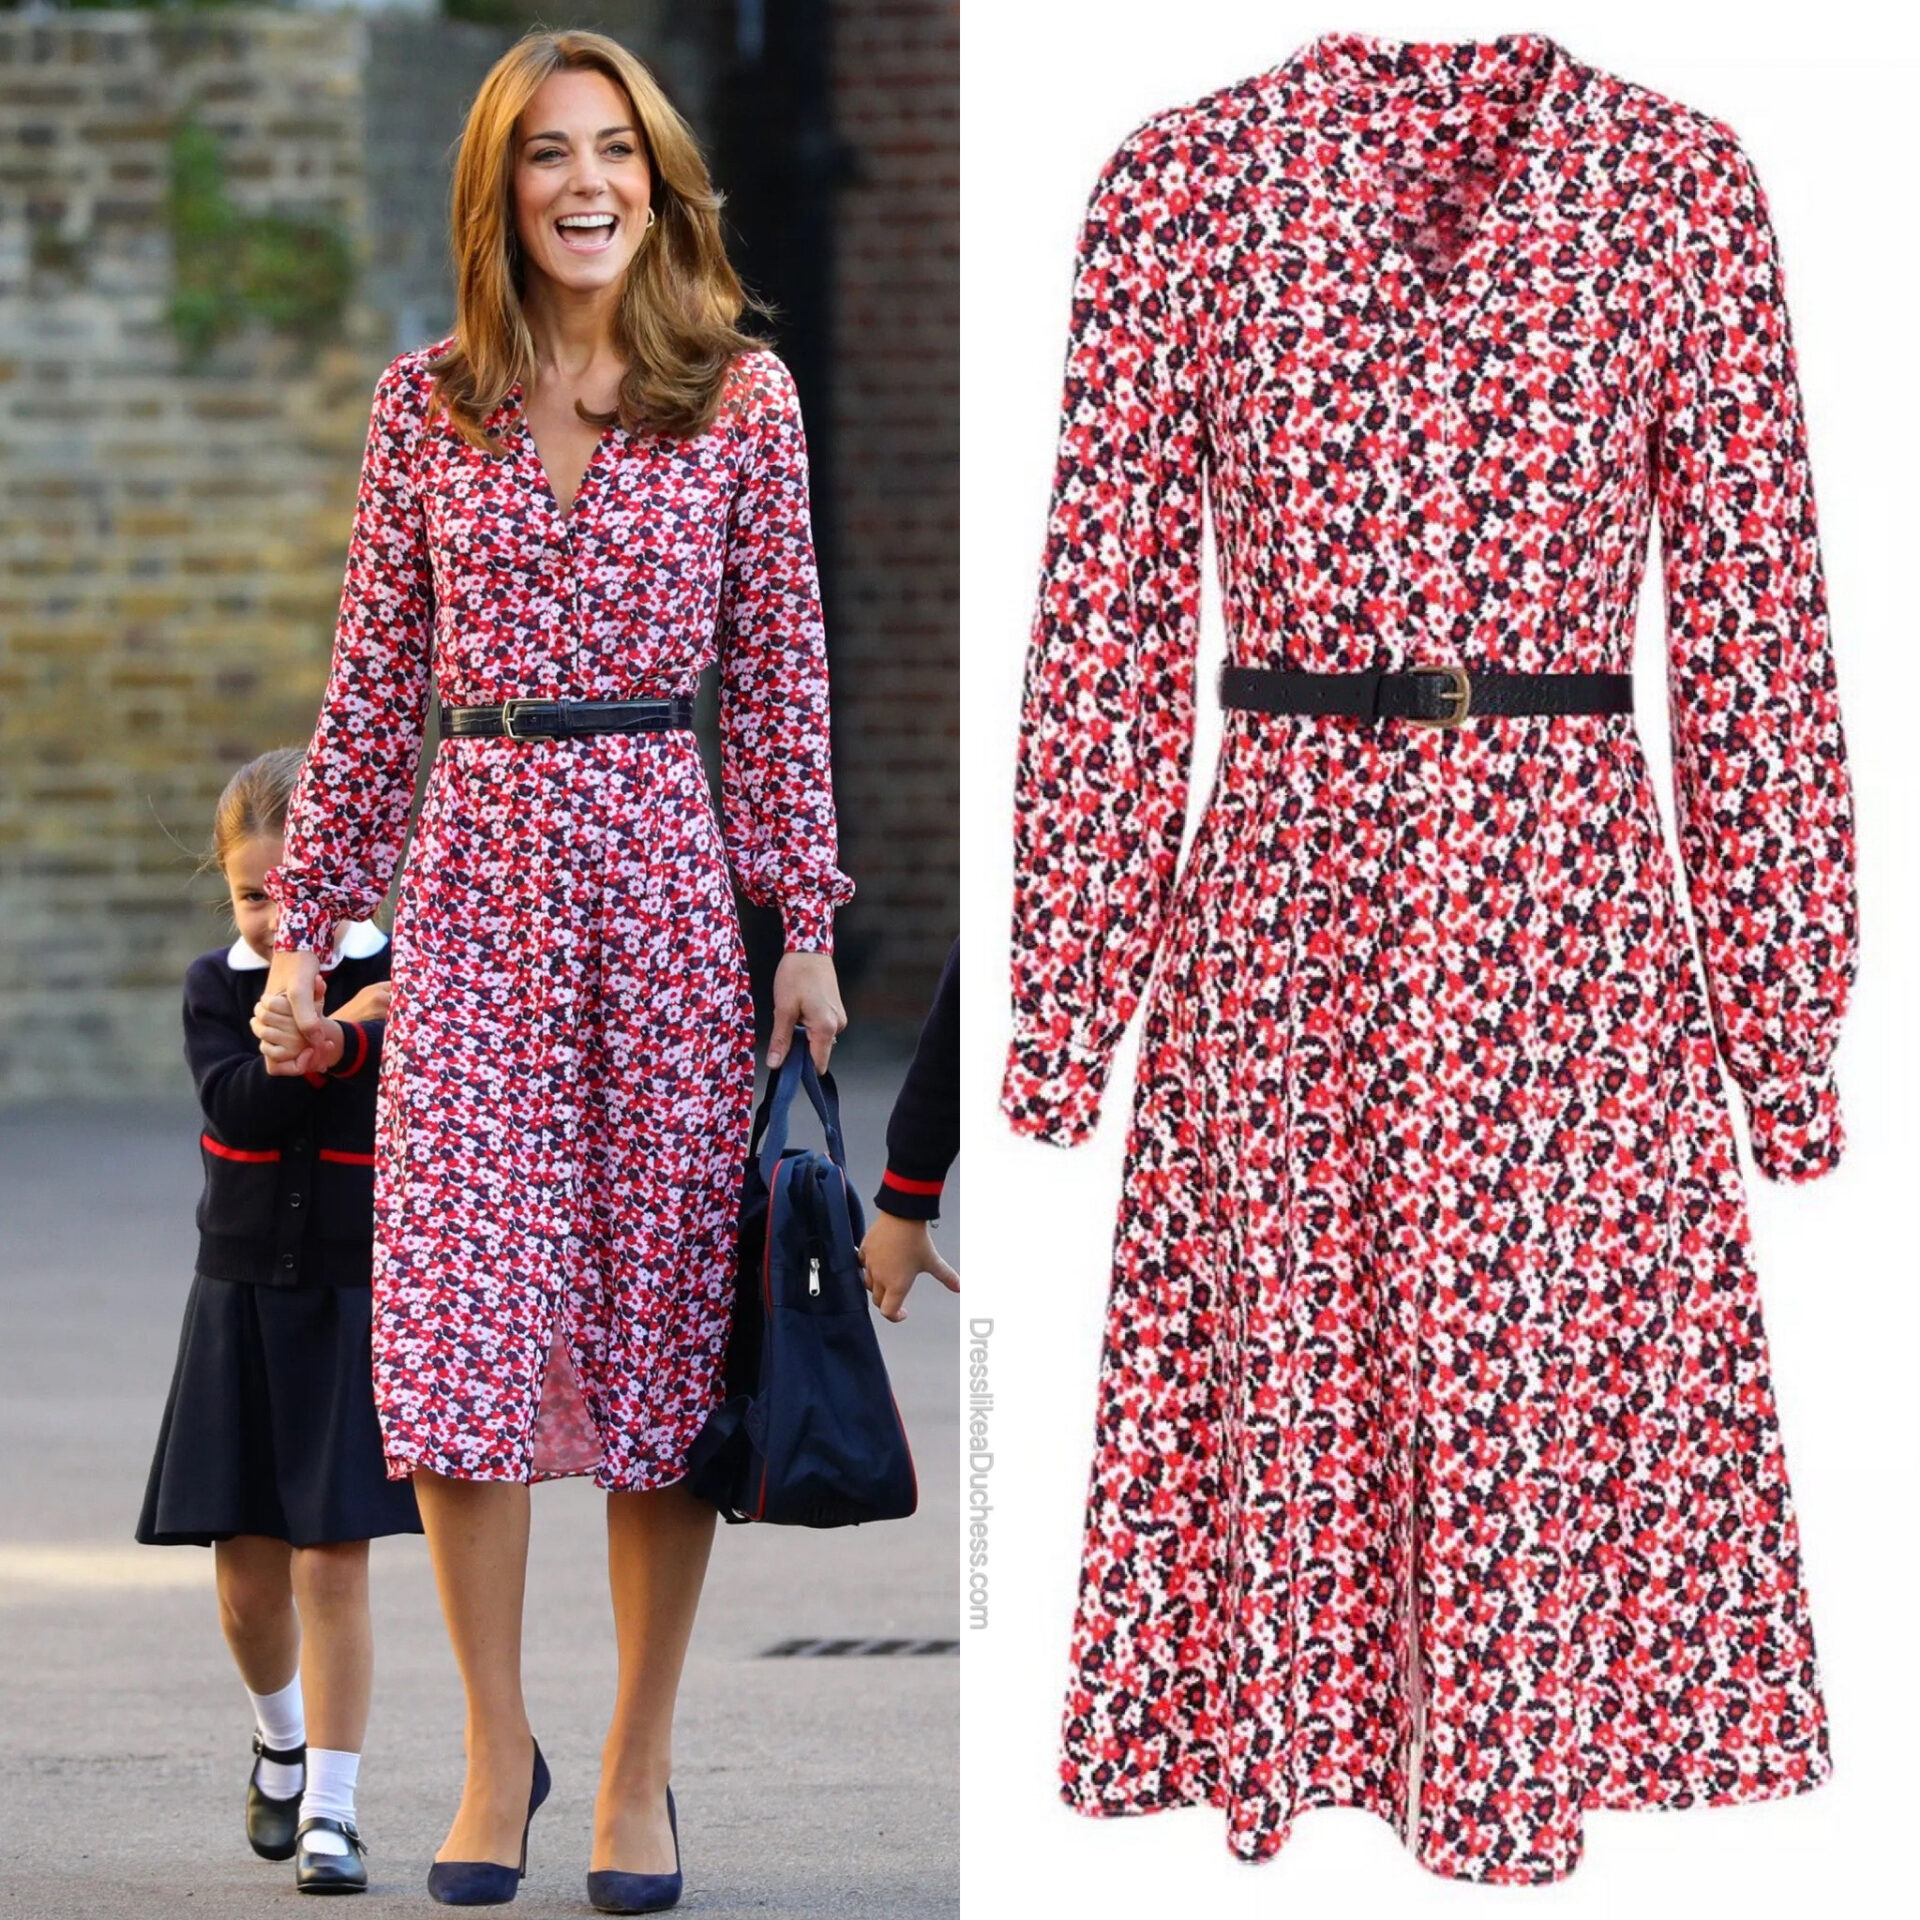 The Best Kate Middleton Replikate Fashions Available on Etsy - Dress ...